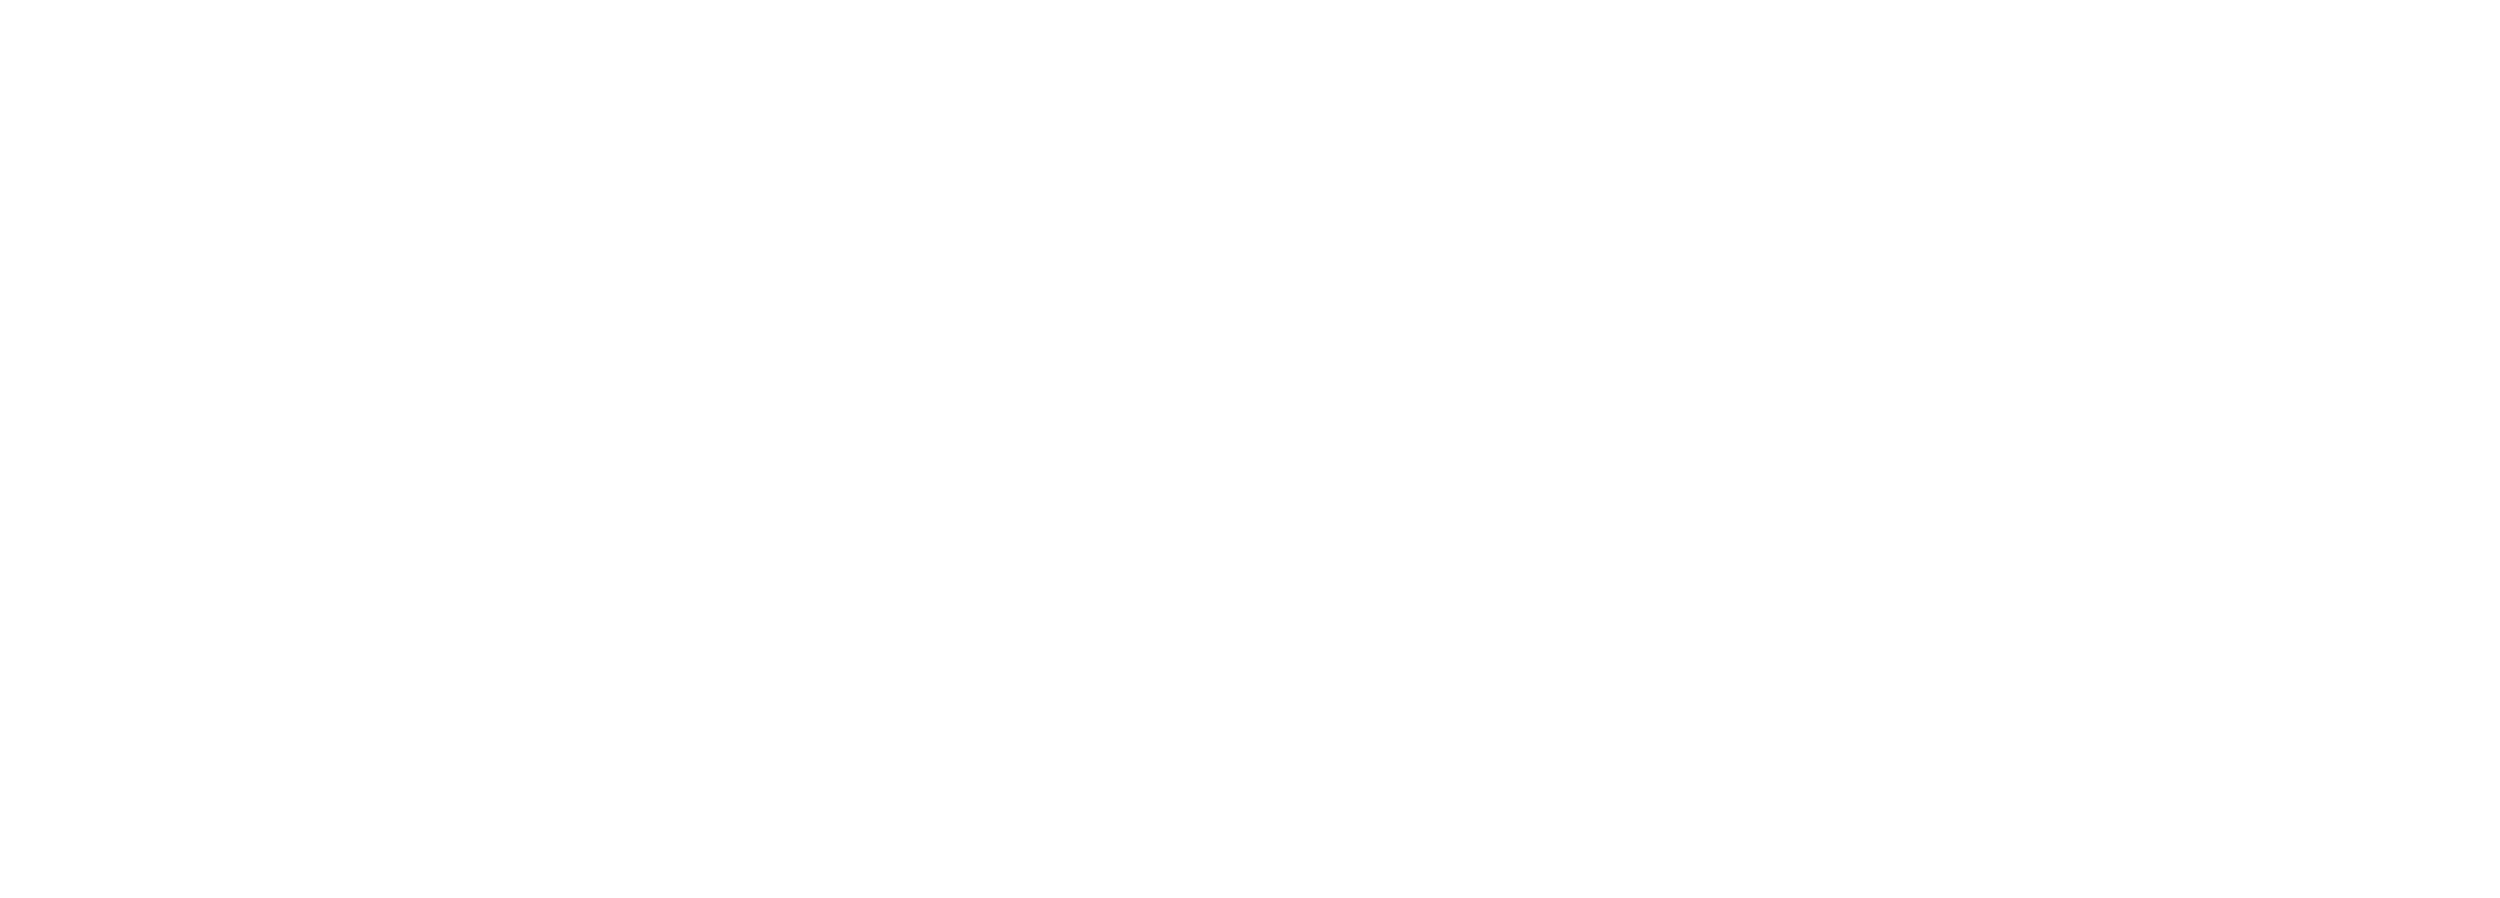 Youth Missions - Mission Trips for Teenagers